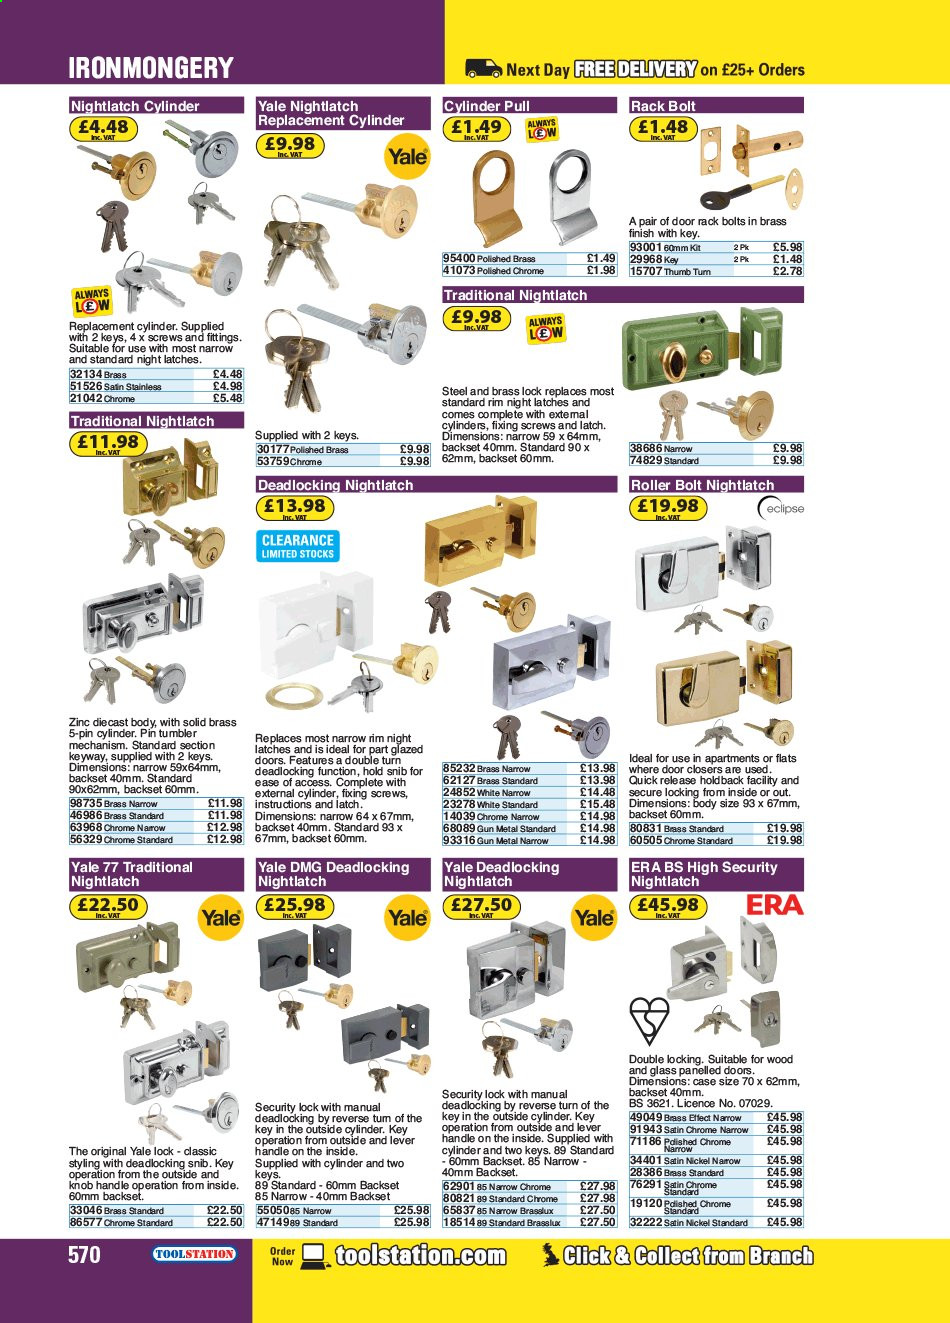 Toolstation offer . Page 570.